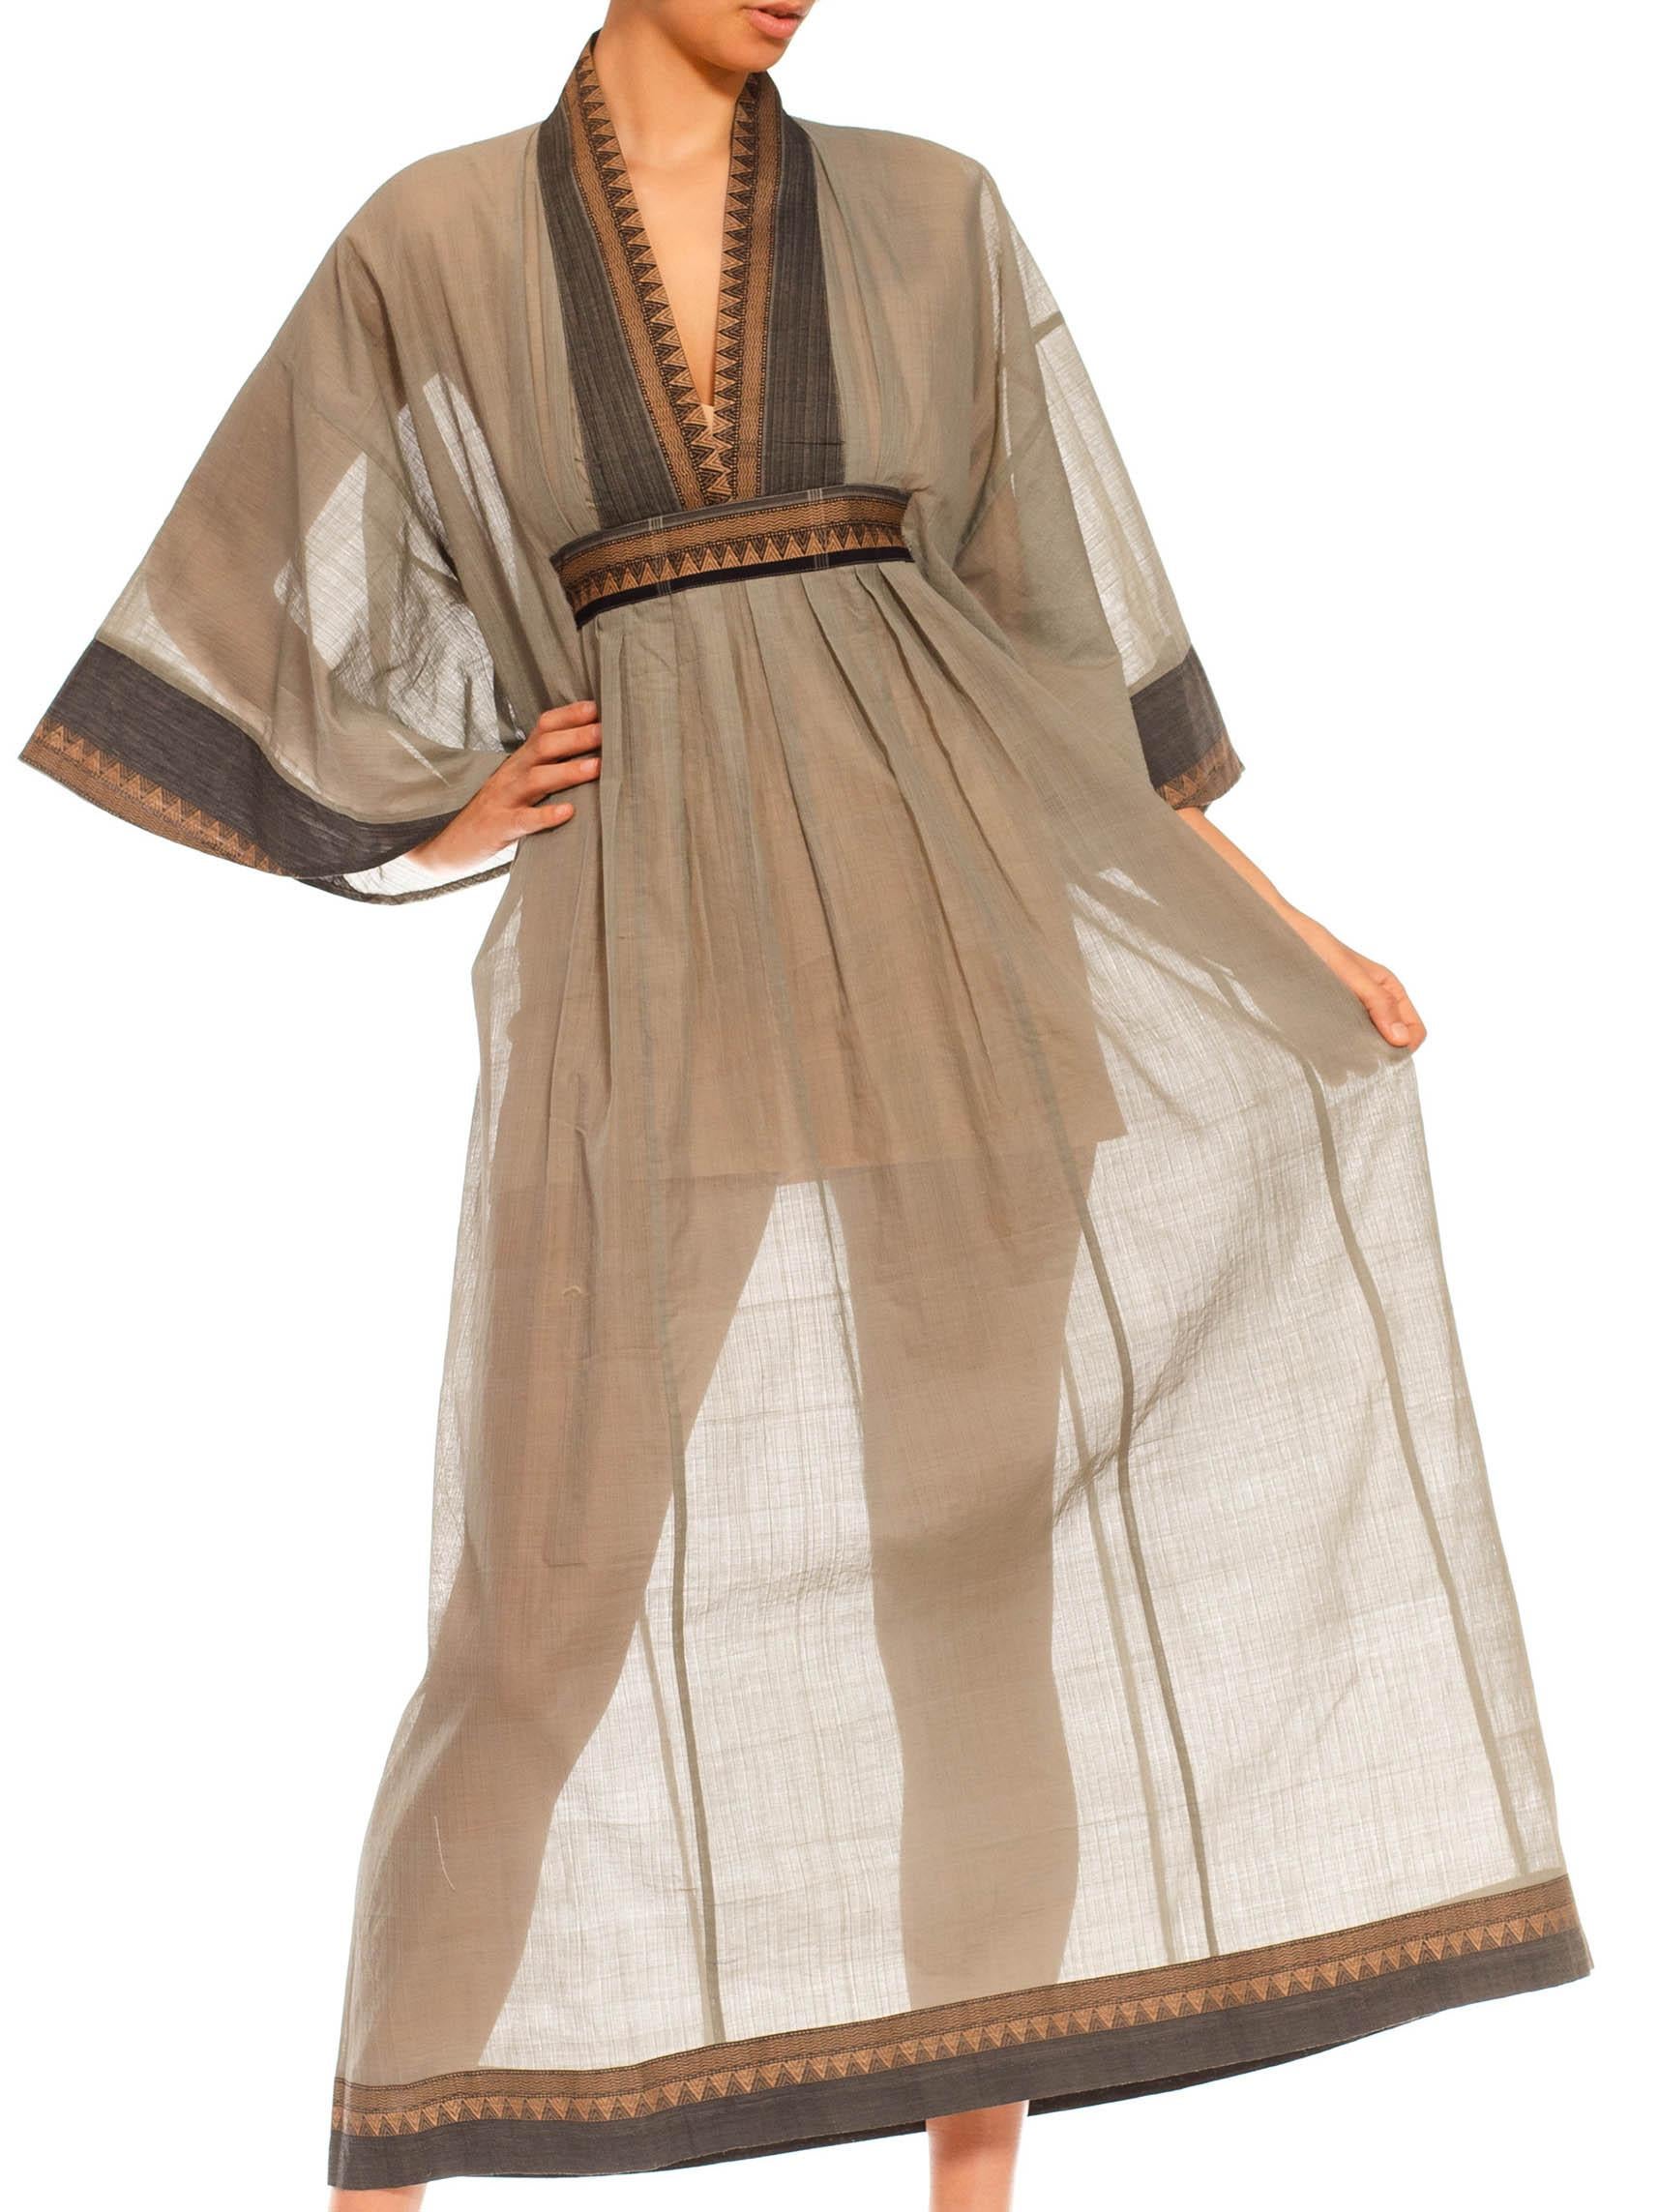 MORPHEW COLLECTION Sageoyster Grey & Black Cotton Jacquard Kaftan Made From Vin For Sale 5